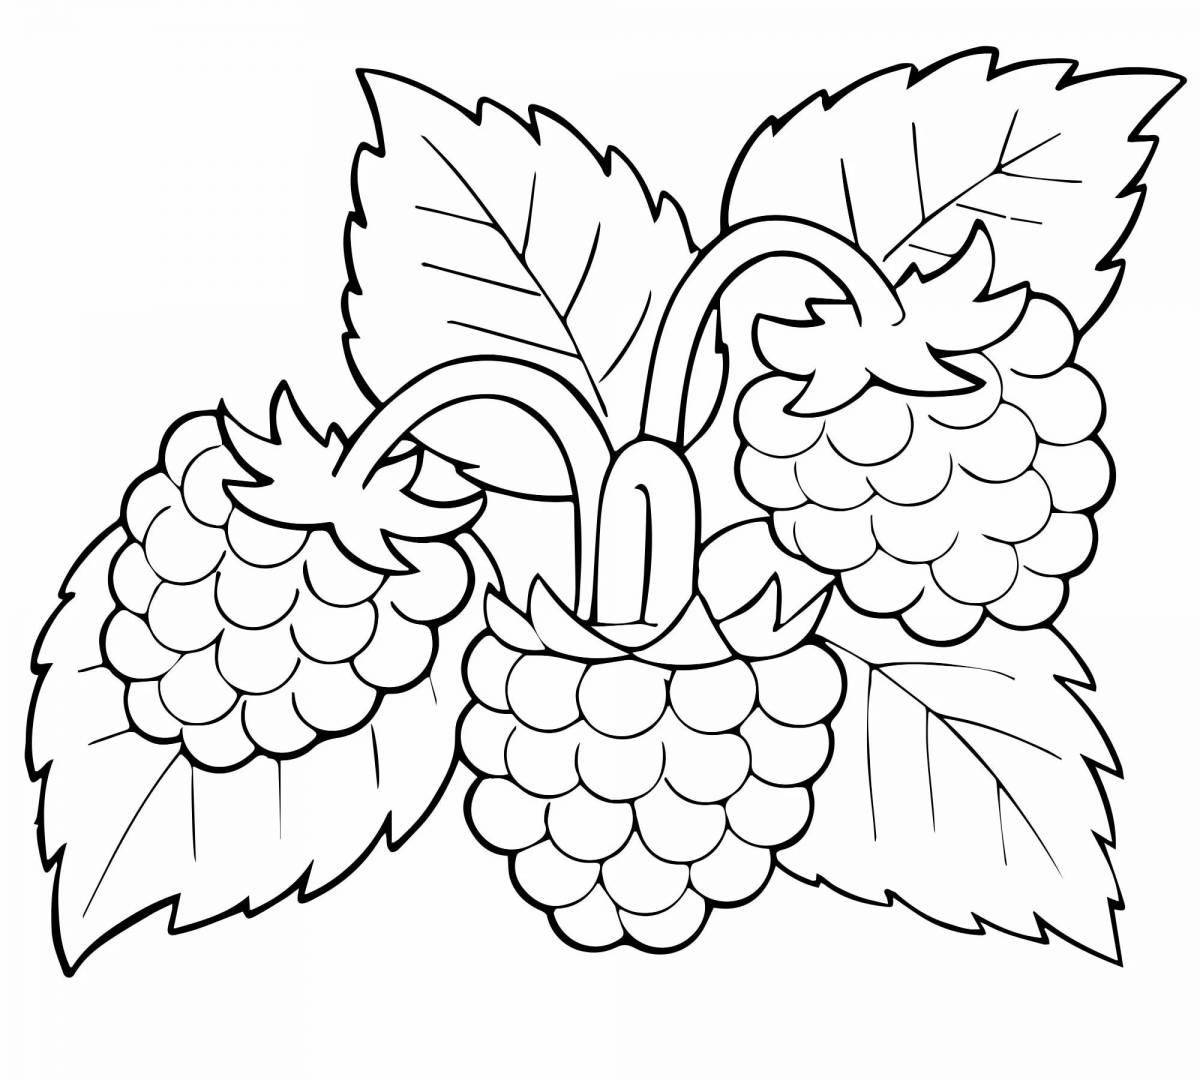 Amazing berries coloring book for kids